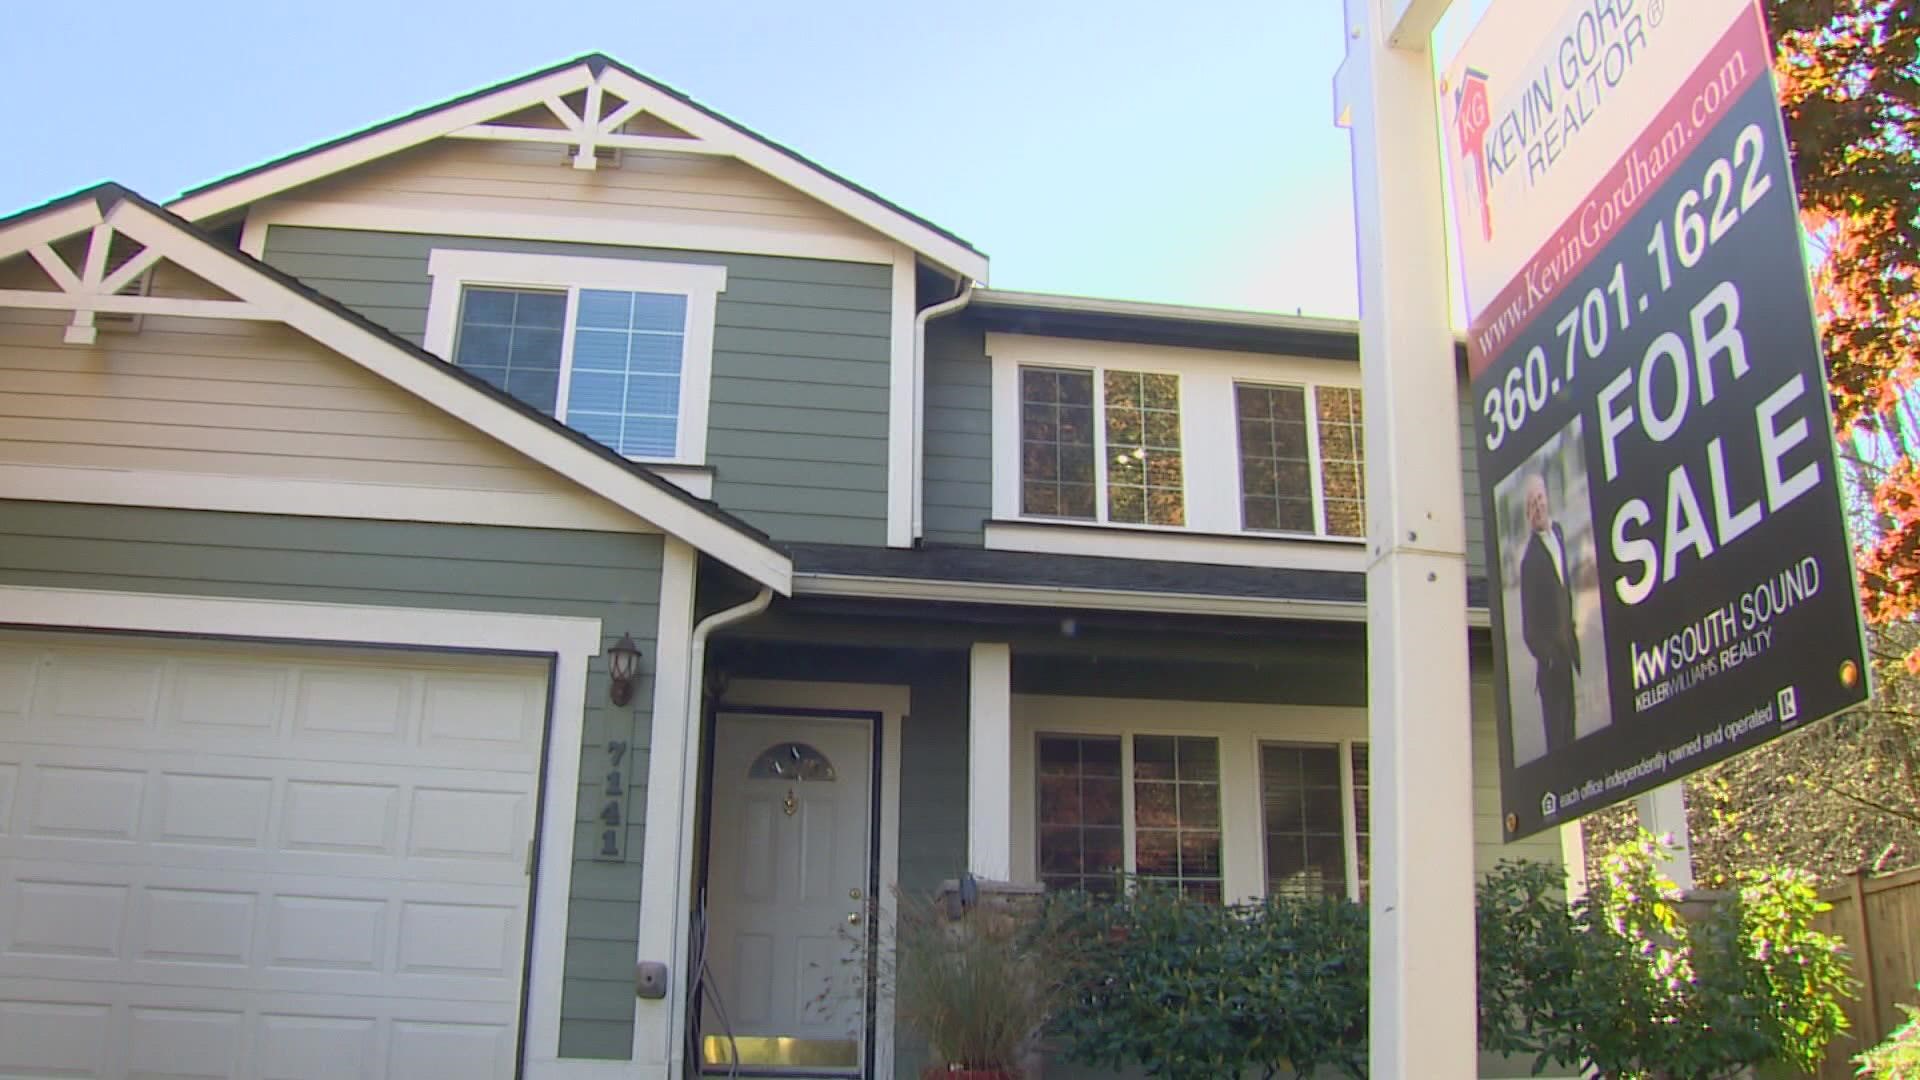 Many home buyers are rushing to secure deals ahead of expected interest rate hikes.